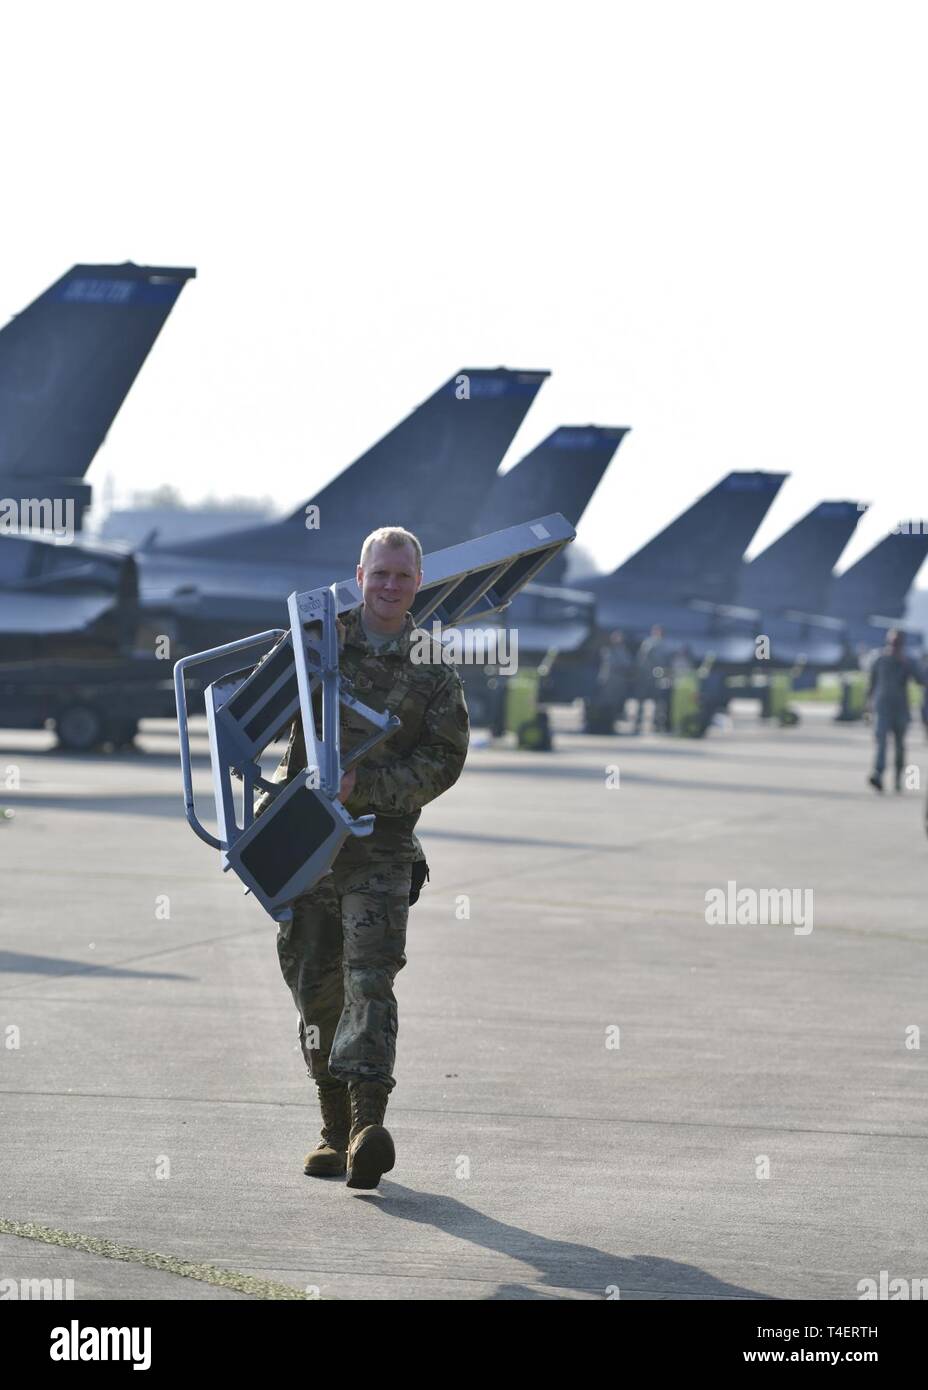 An airman from the 148th Maintenance Group from the Duluth, Minn. based 148th Fighter Wing helps complete the routine maintenance activities for F-16 Aircraft for  Frisian Flag 2019 held at Leeuwarden Air Base.  Frisian Flag is a 12-day NATO partnership exercise in the Netherlands that will allow all international participants of the exercise to execute training on operational tactics in a global setting with multiple coalition partners like Germany, Poland, France, and the United States who are participating in this year’s event. Stock Photo